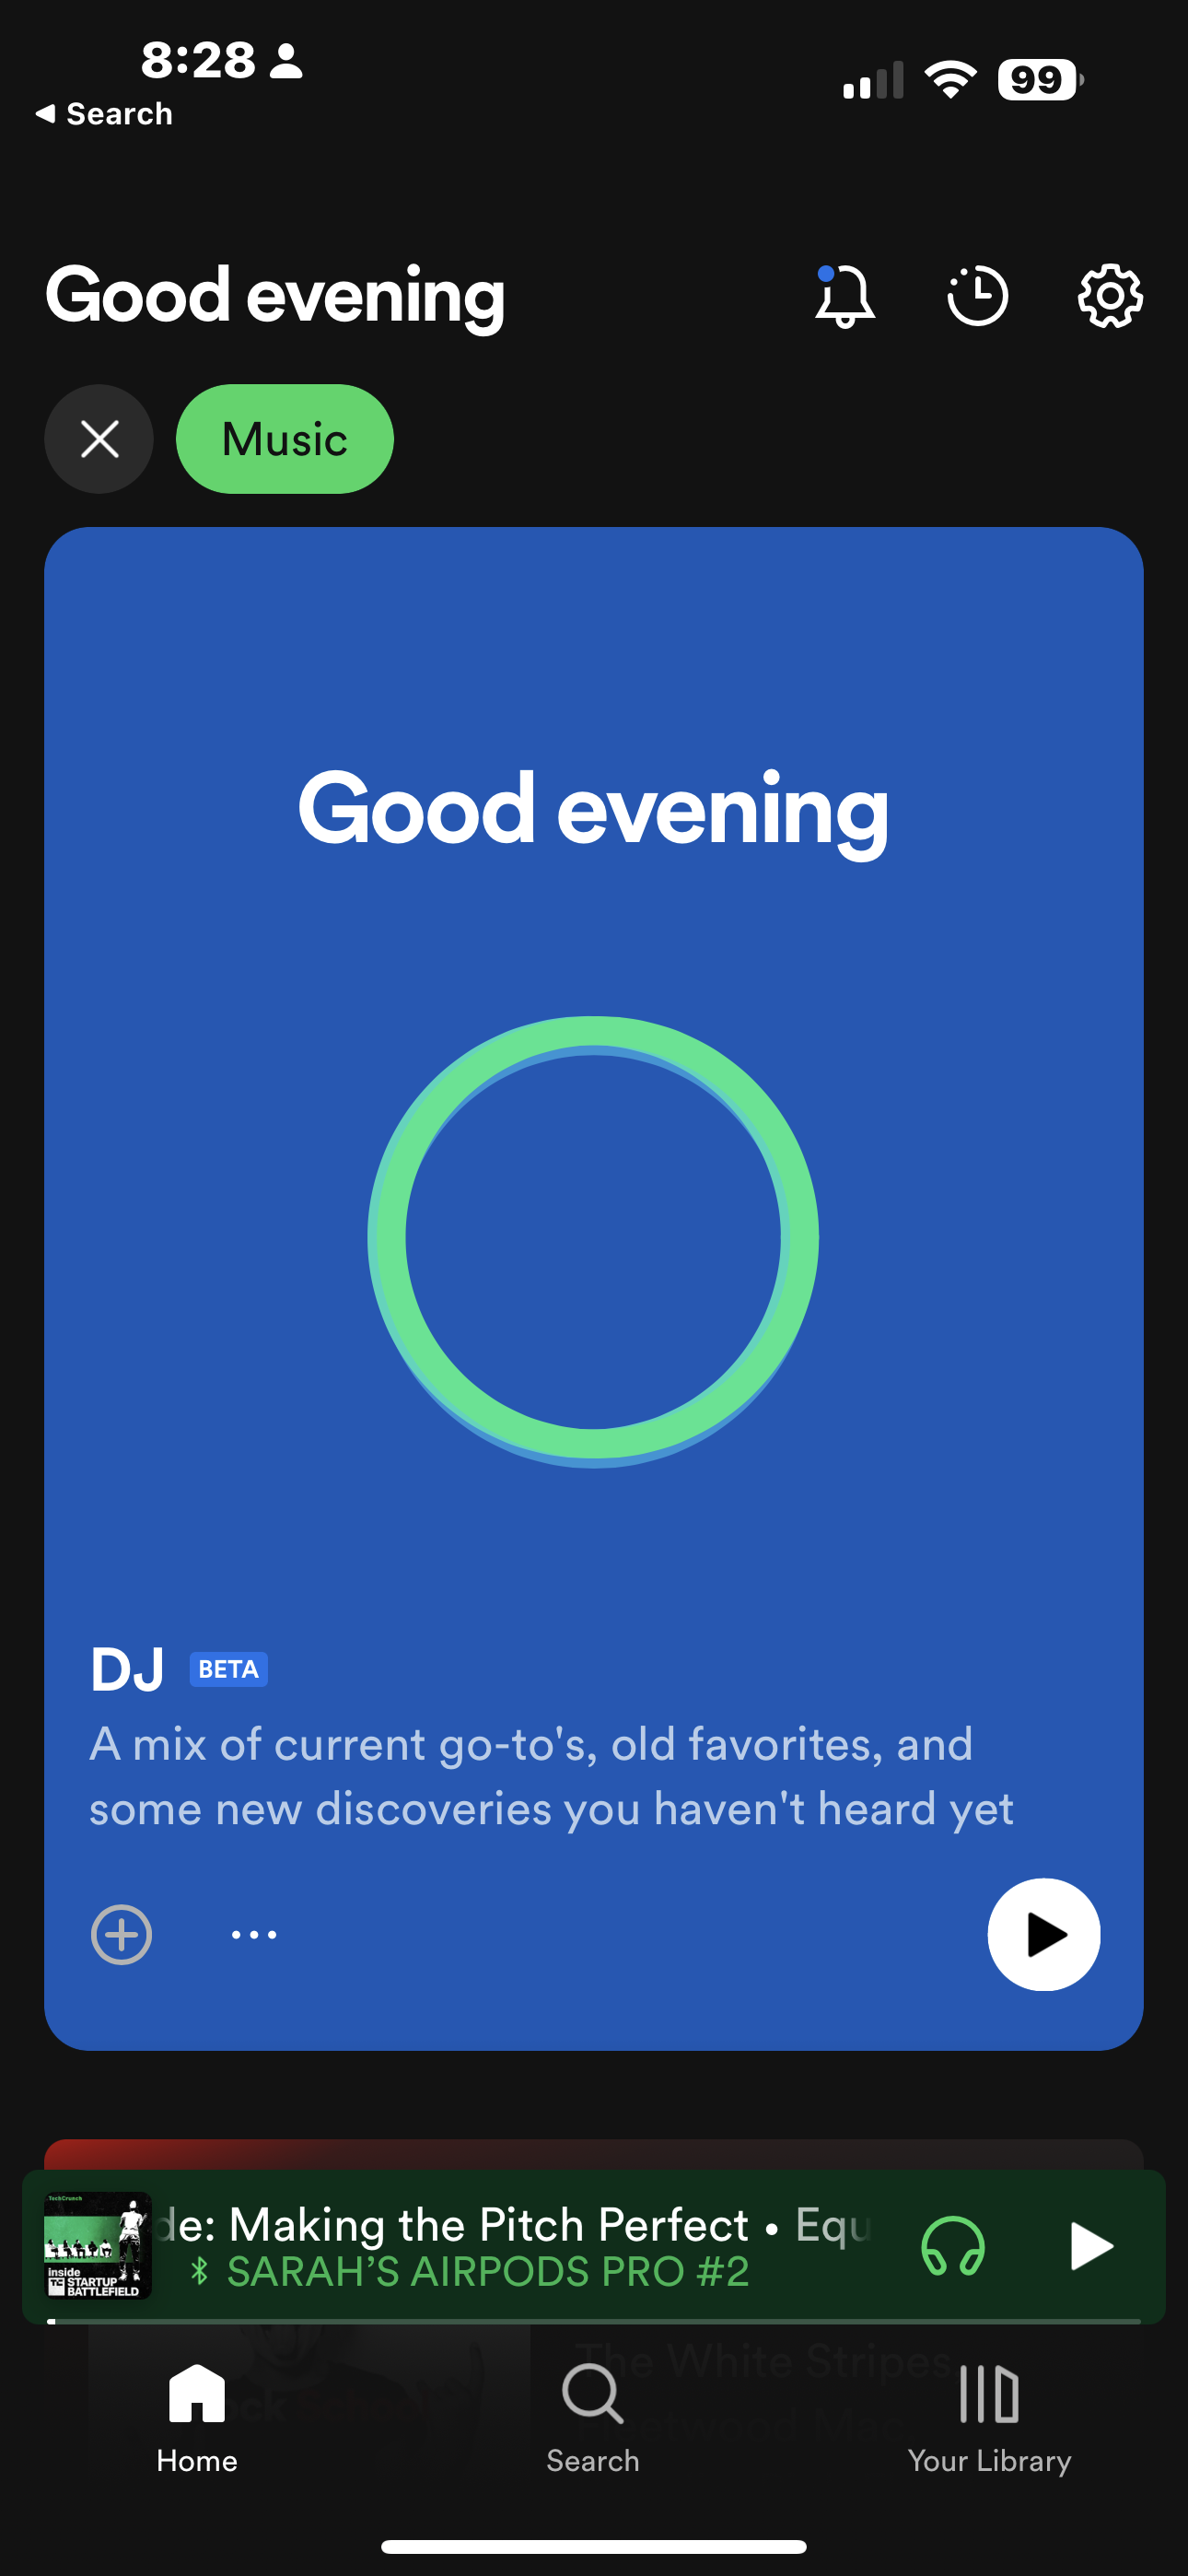 Spotify launches ‘DJ,’ a new feature offering personalized music with AI-powered commentary